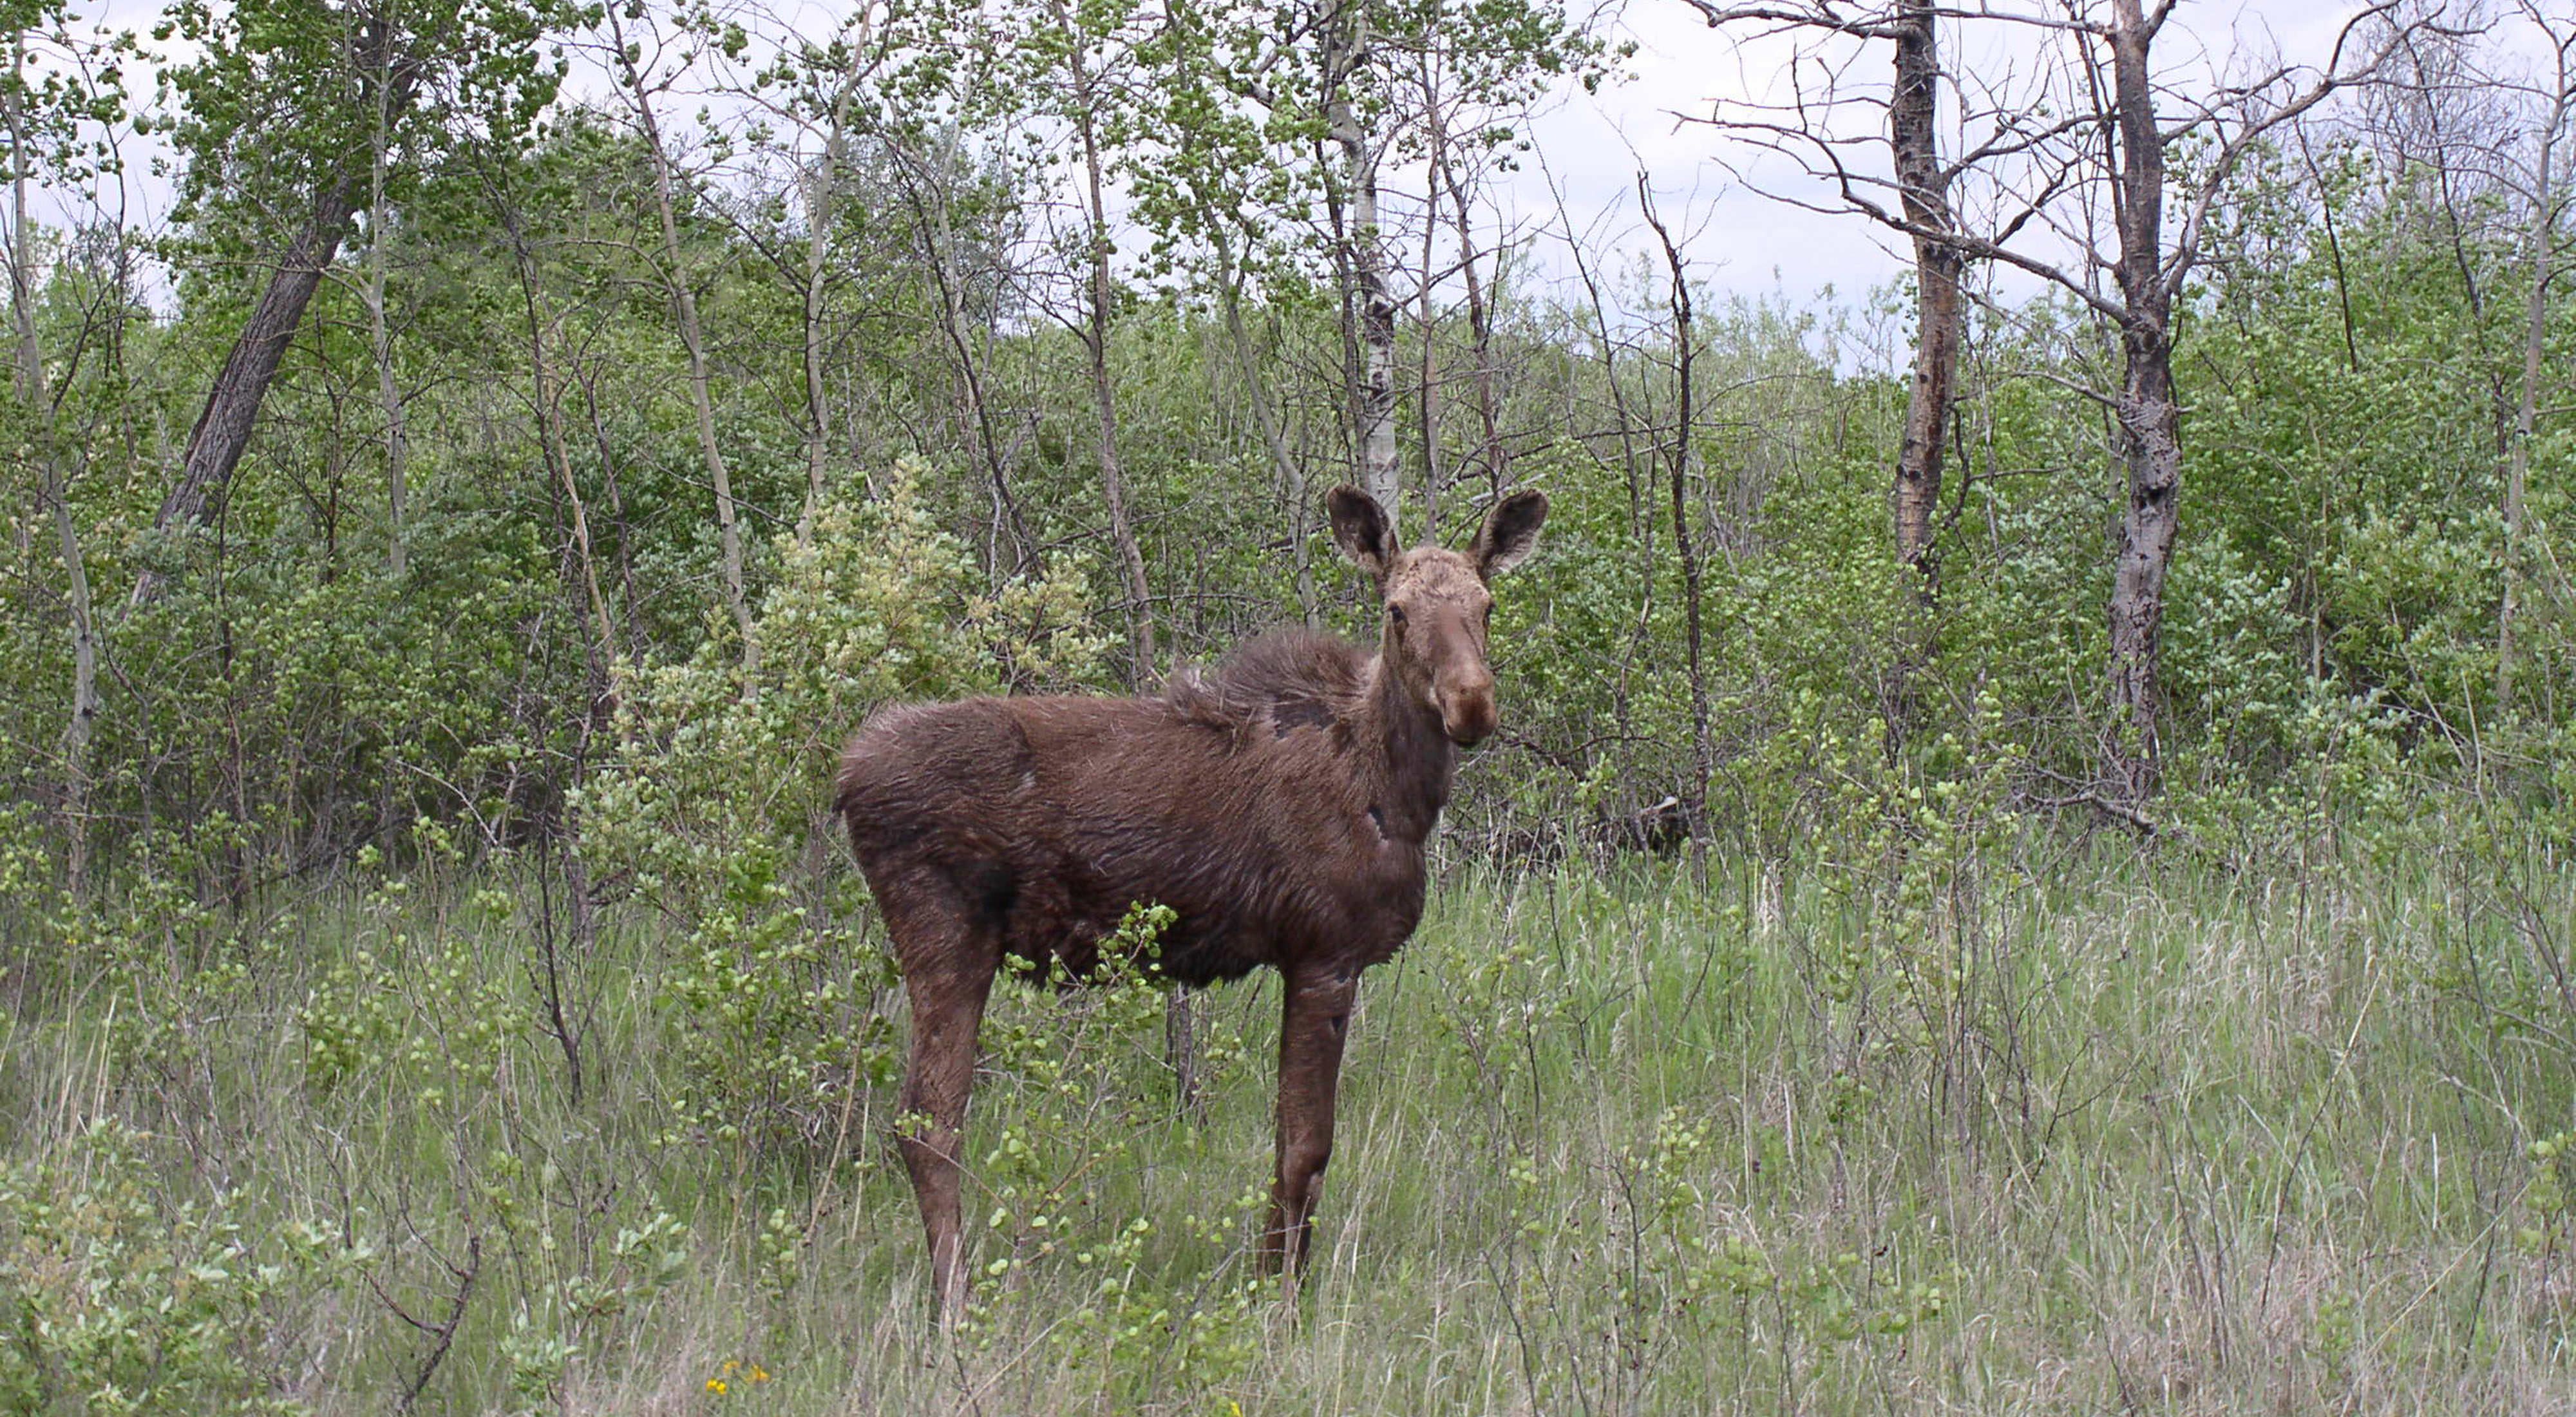 Lone moose at the Glacial Ridge Project for prairie and wetland restoration in northwestern Minnesota